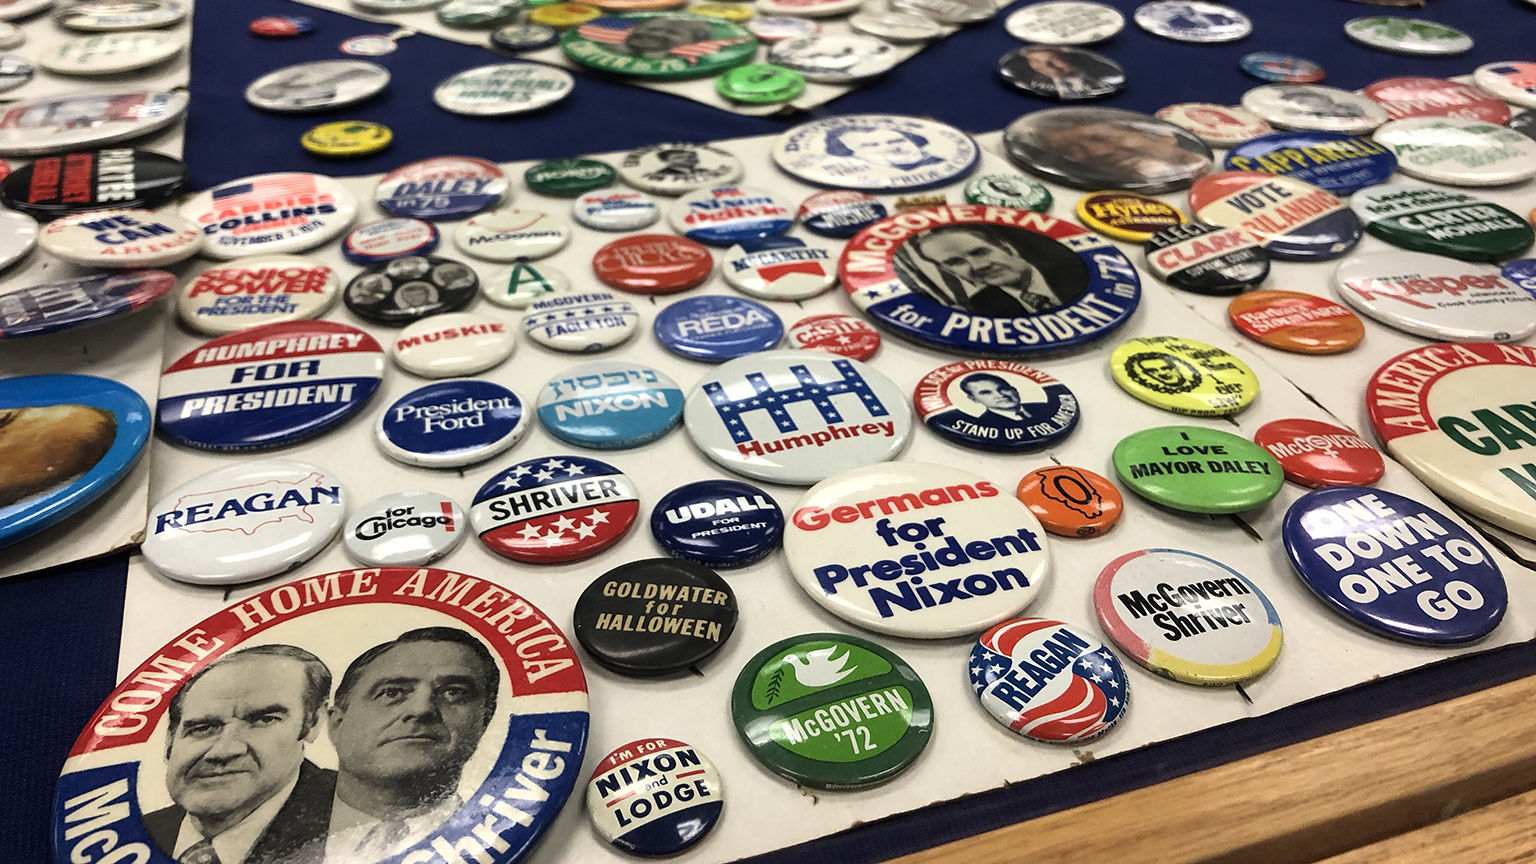 Political Button Collecting and Reproductions